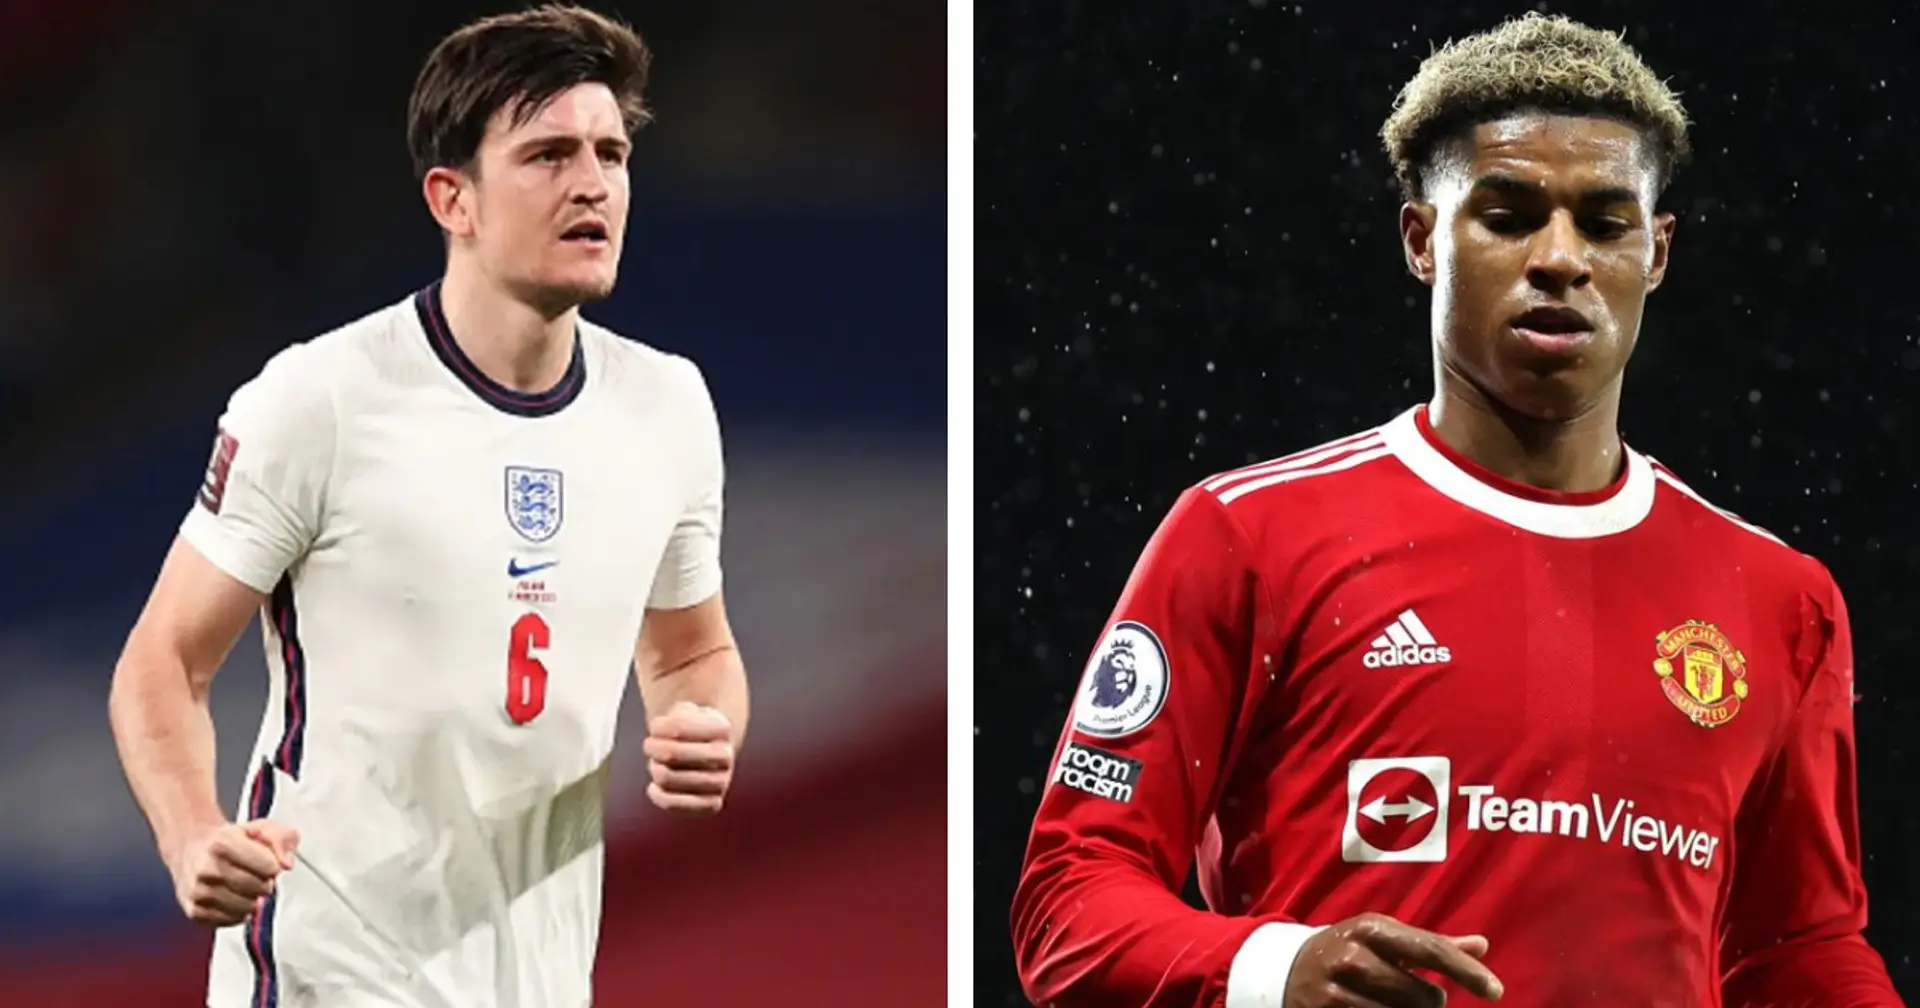 Harry Maguire in, Marcus Rashford and Jadon Sancho out: latest England squad announced